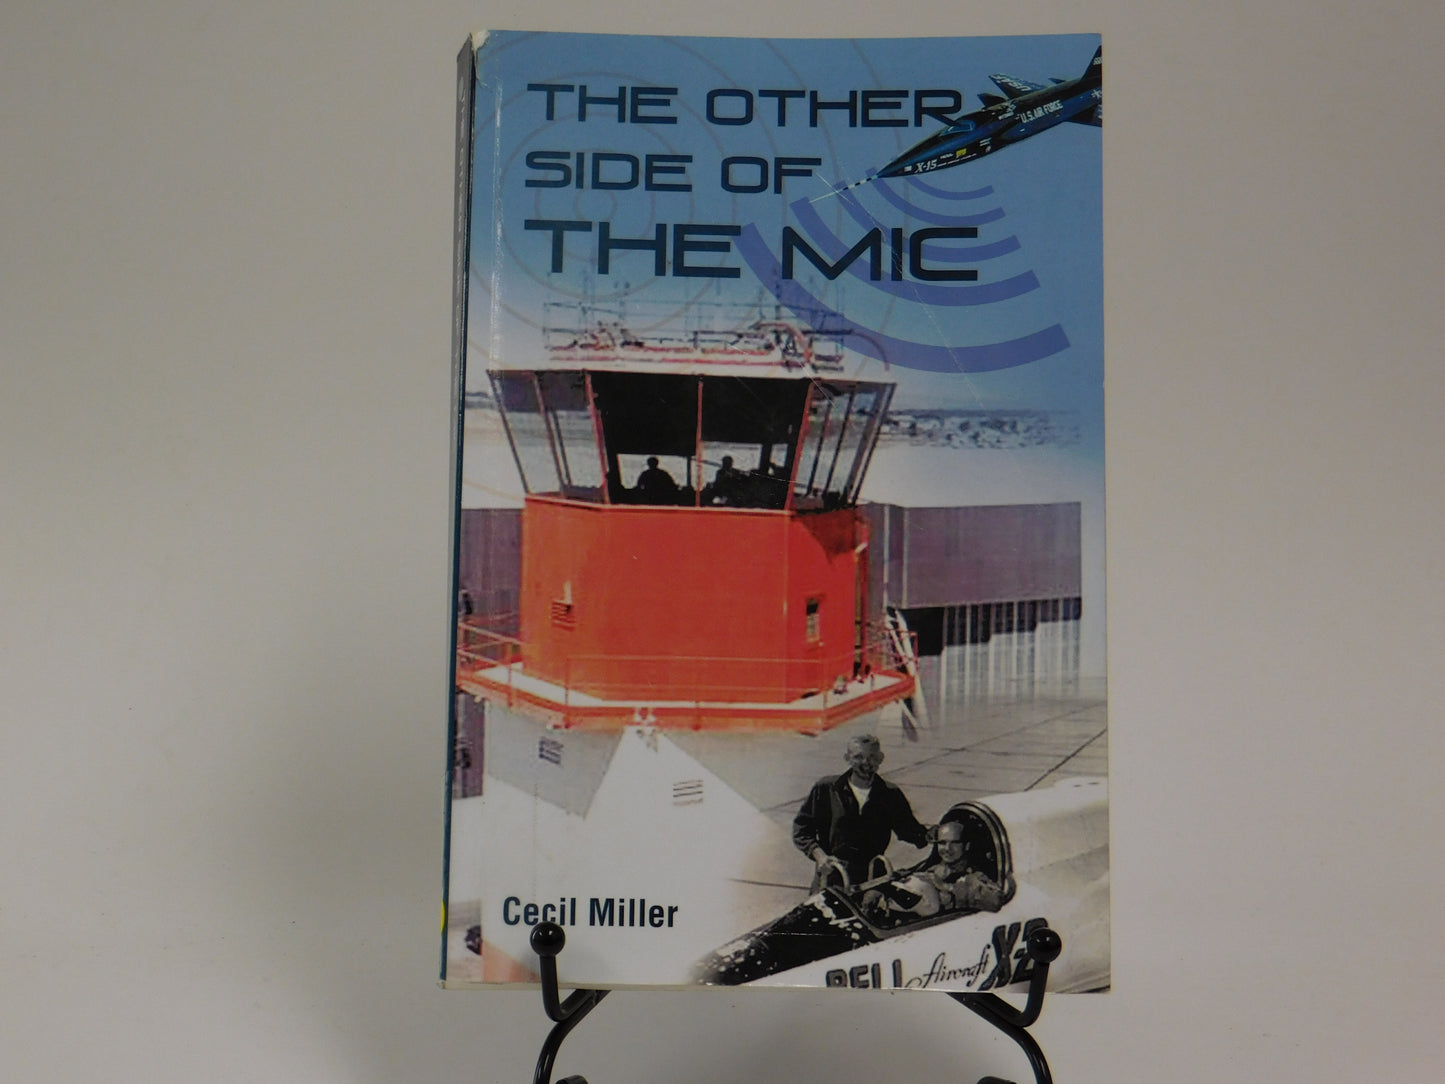 The Other Side of the Mic by Cecil Miller